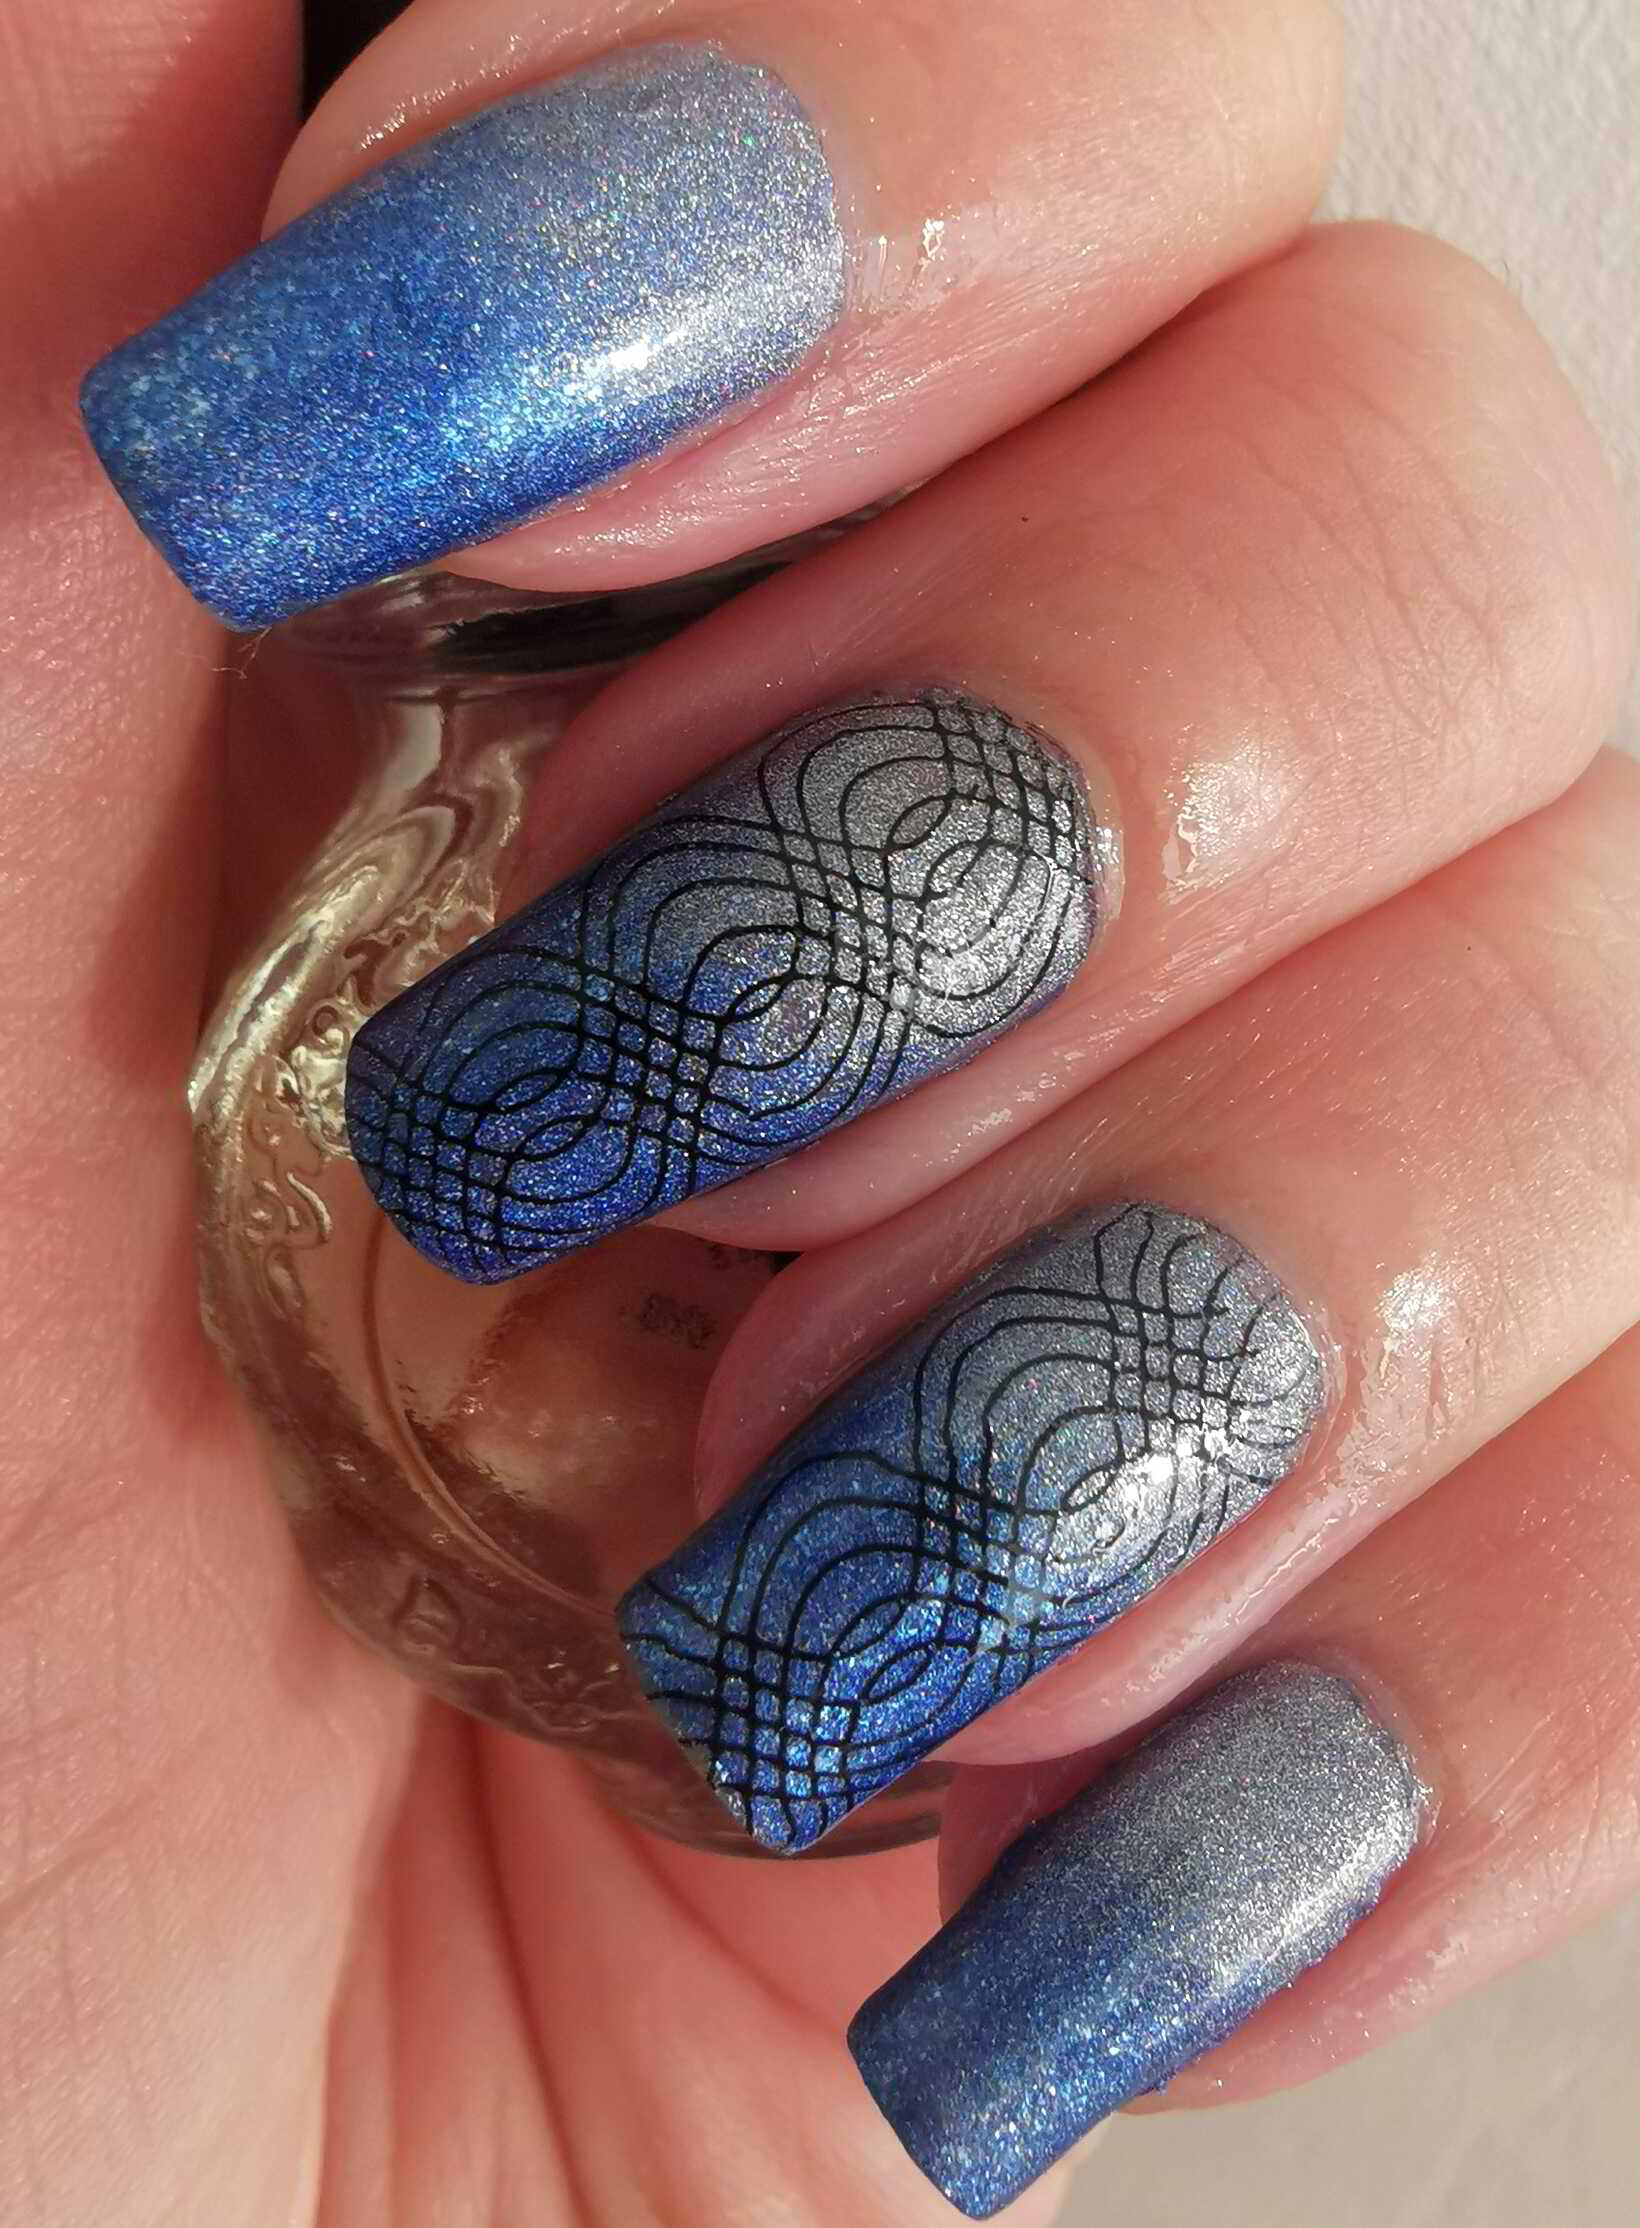 Nail polish manicure of shade Holo Taco Sparkling Water, Color Club Just My Luck, Moyra Spider Gel, Konad Black Stamping Polish, 